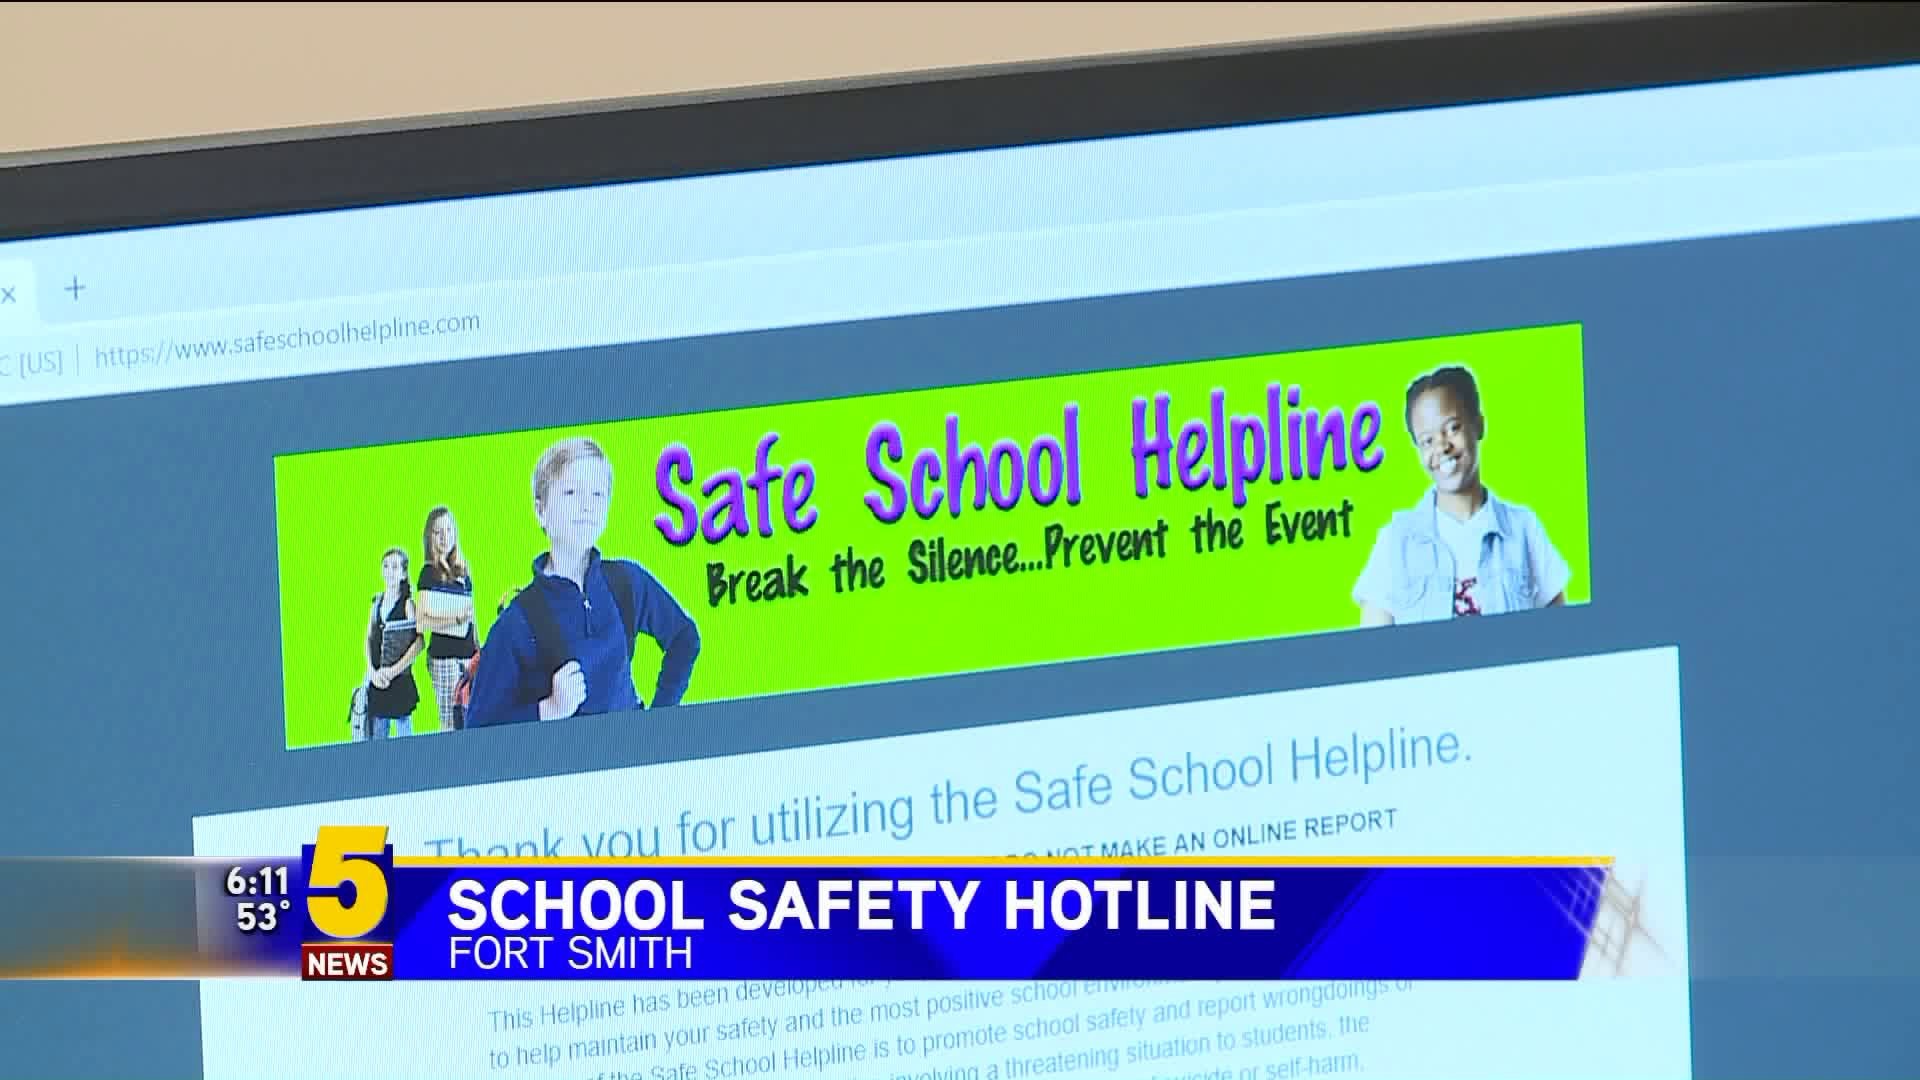 School Safety Hotline For Fort Smith Schools